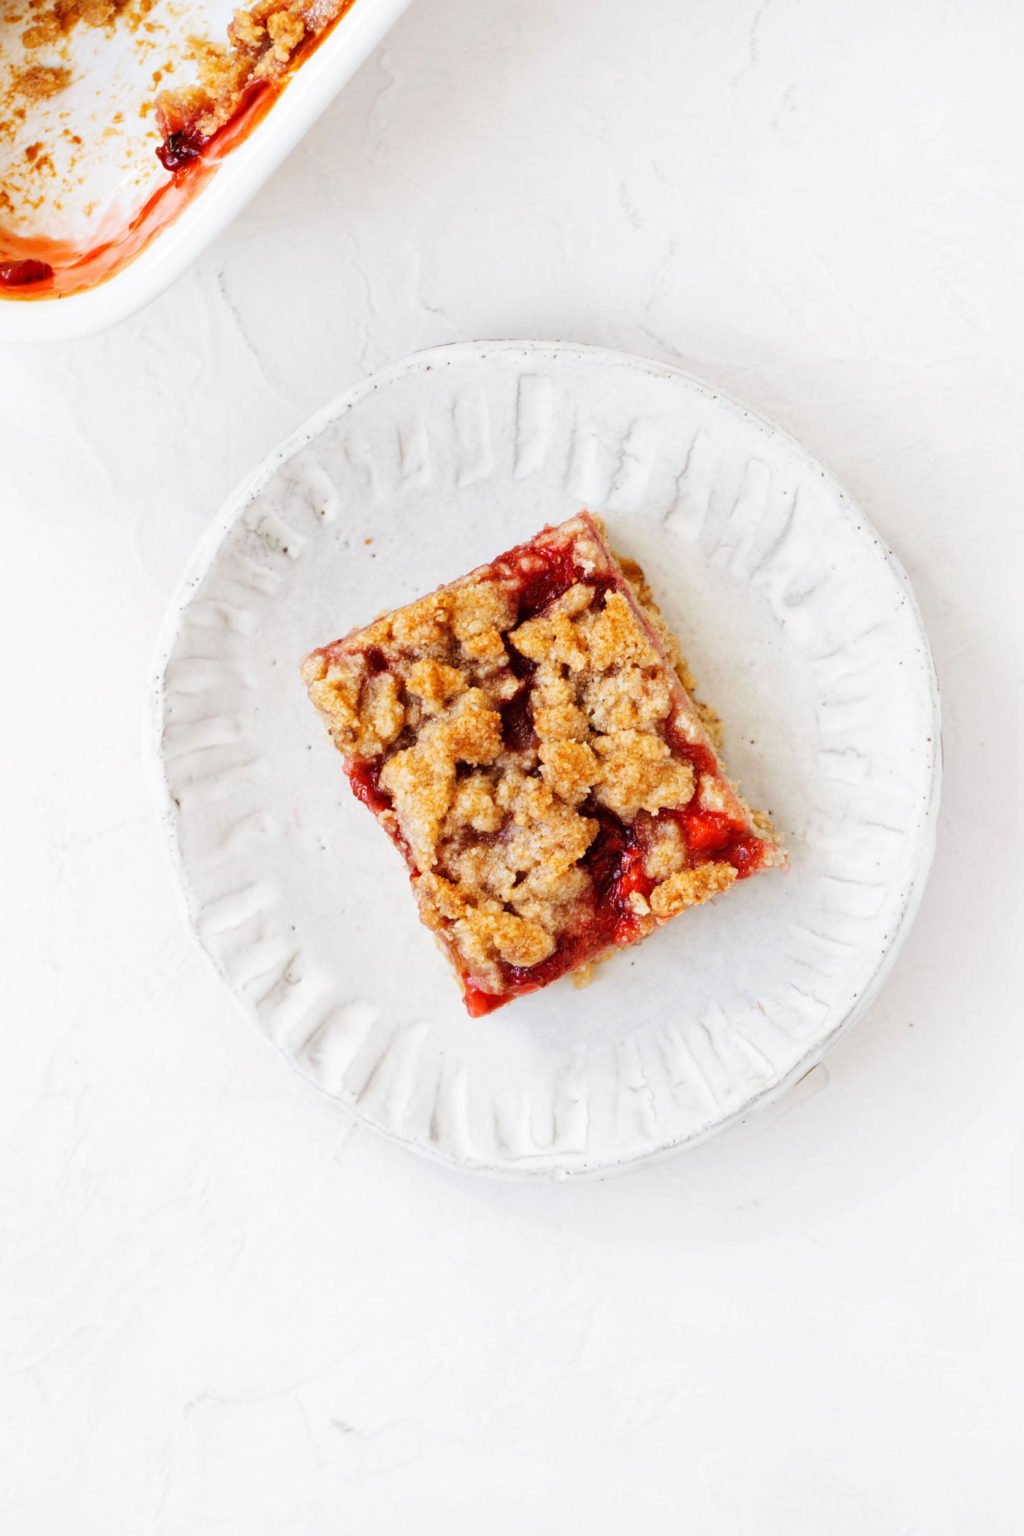 A small white dessert plate has been topped with a rustic, plant-based fruit dessert that's cut into a square shape.